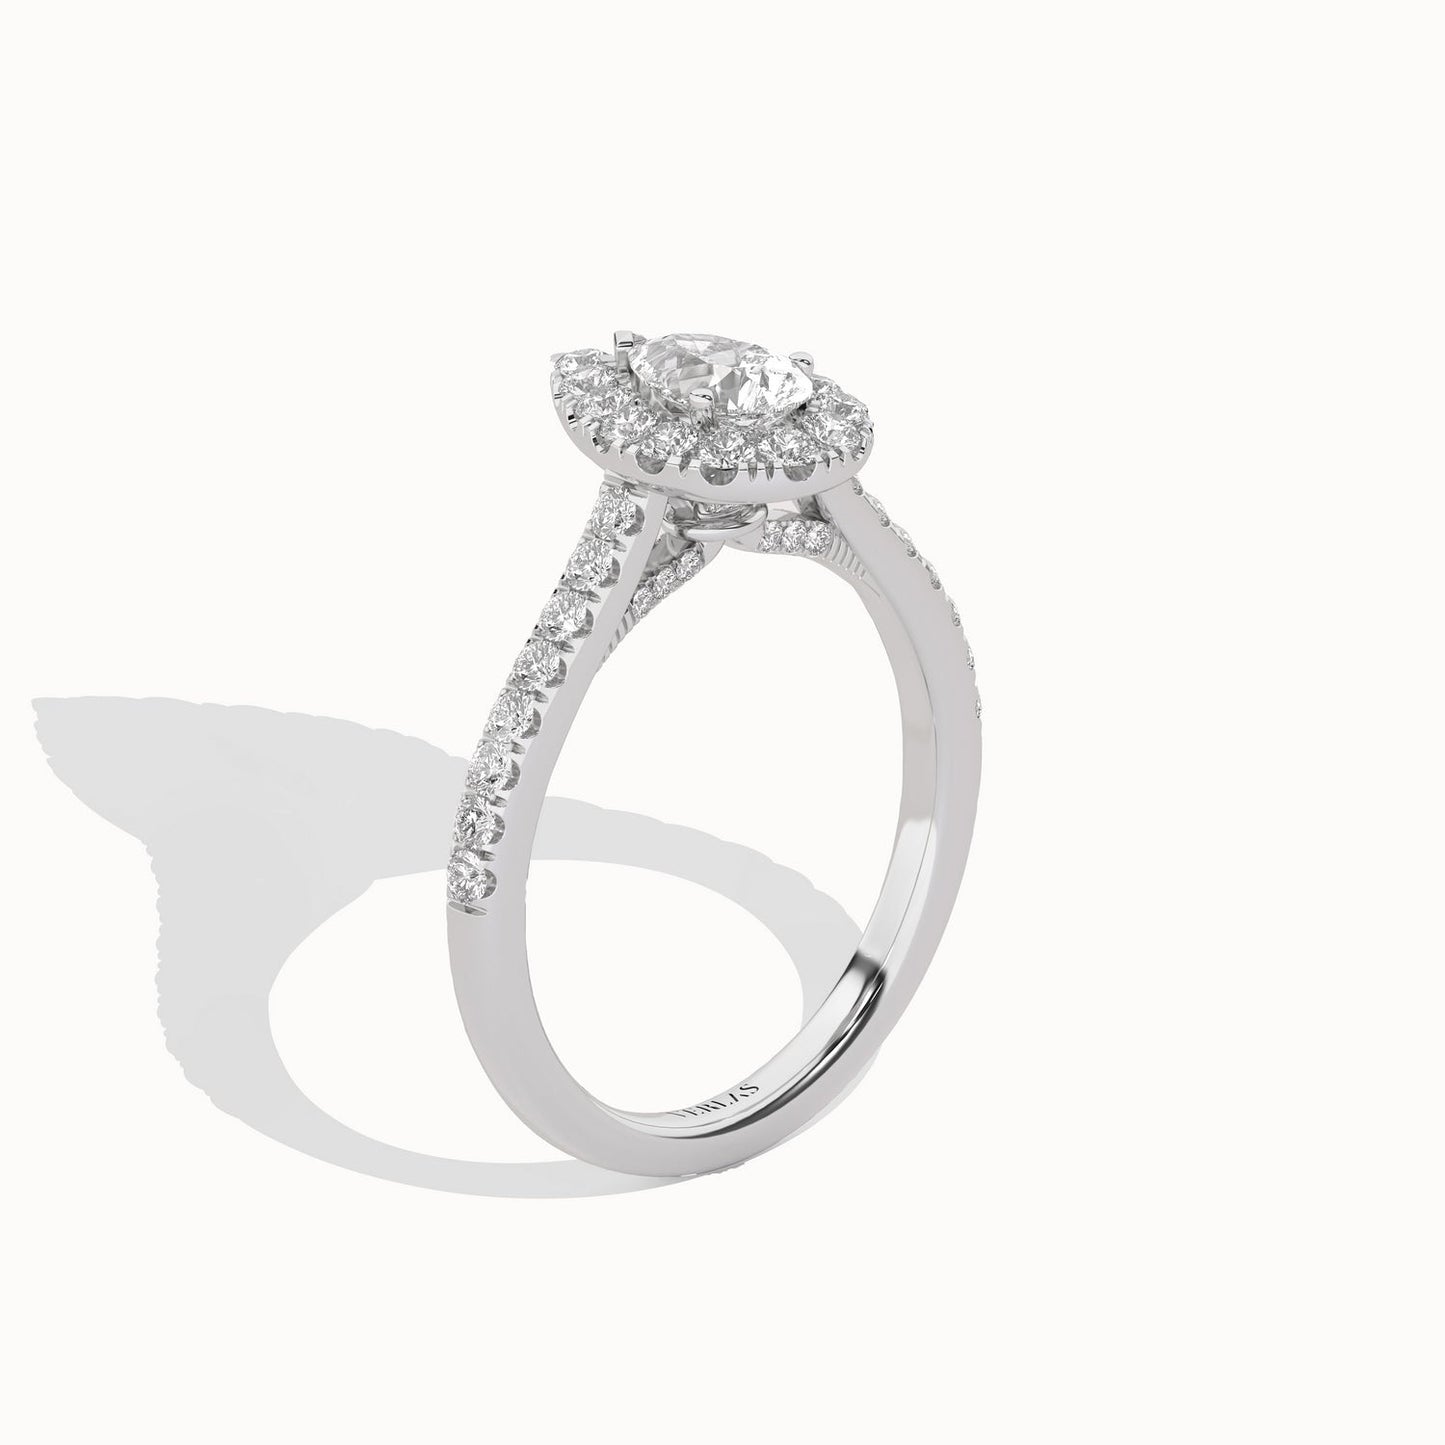 Signature Dewdrop Halo Ring_Product Angle_1Ct - 2